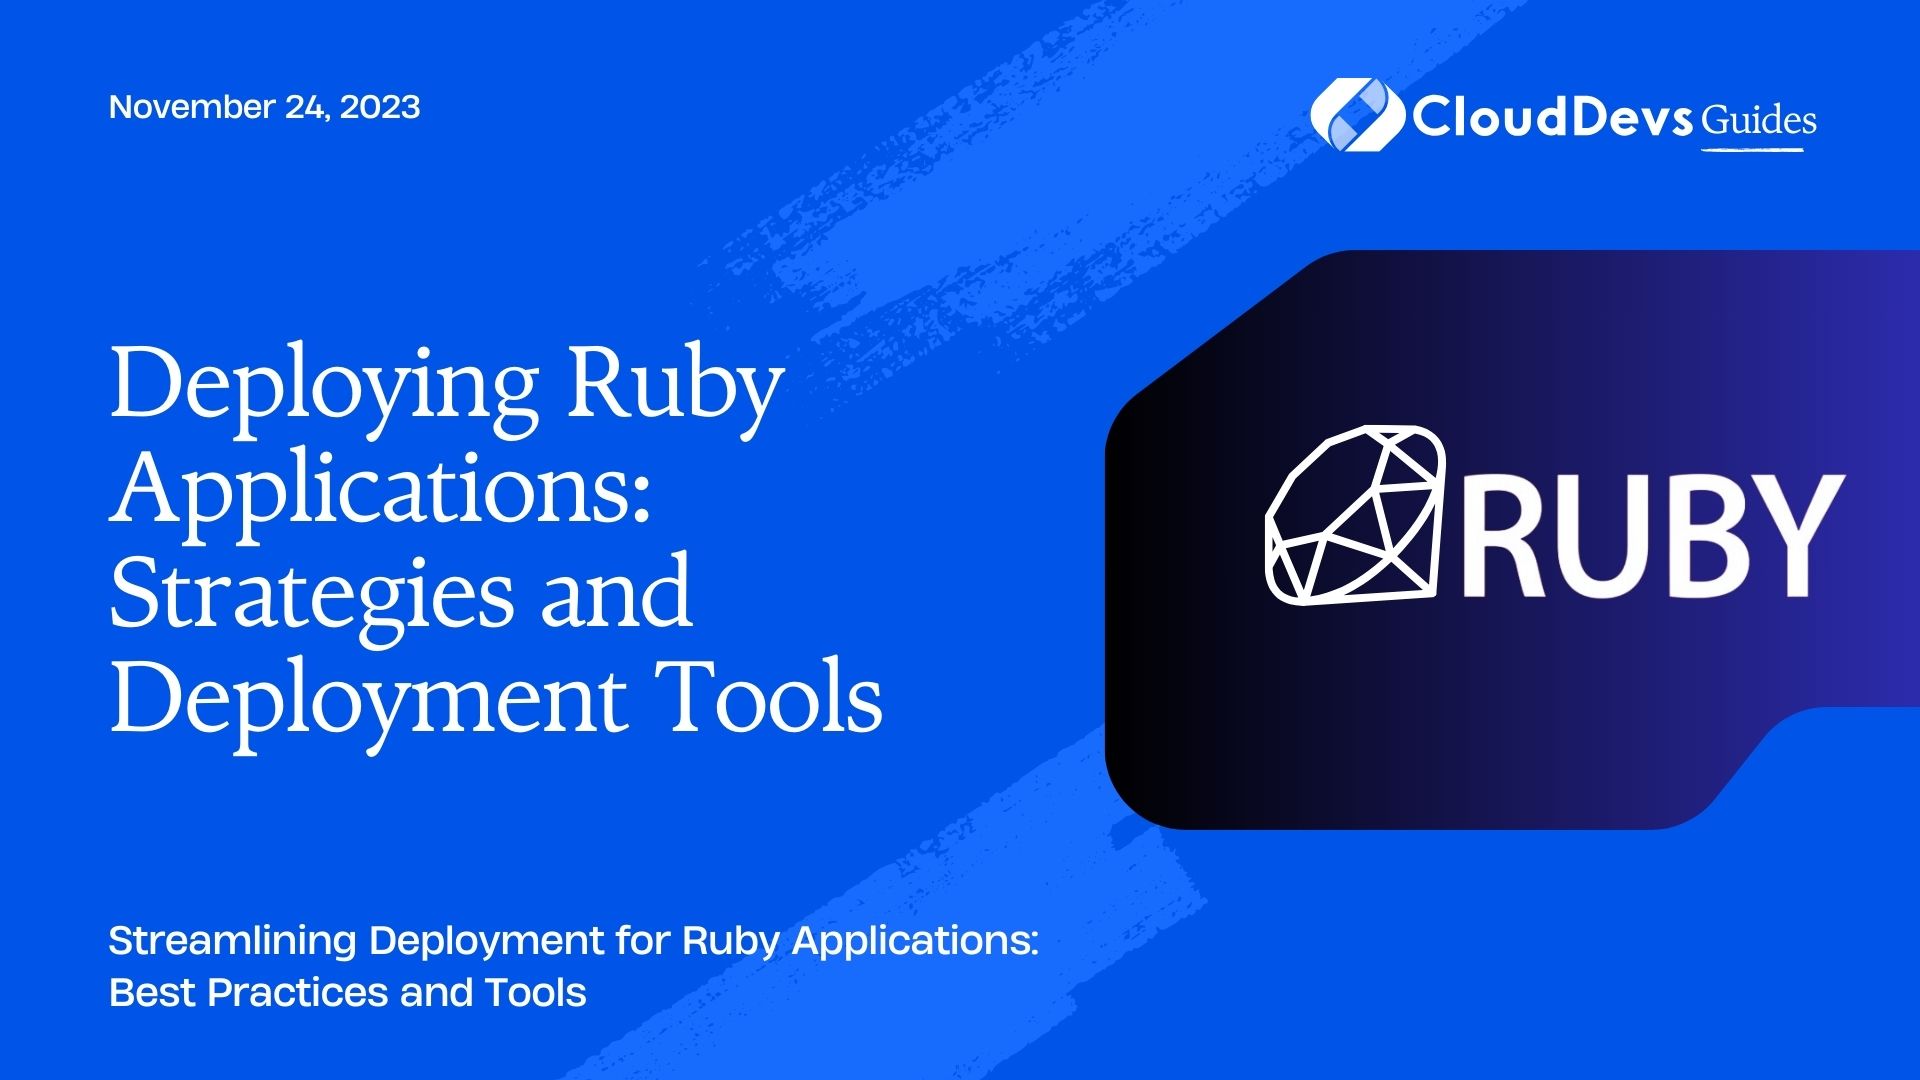 Deploying Ruby Applications: Strategies and Deployment Tools